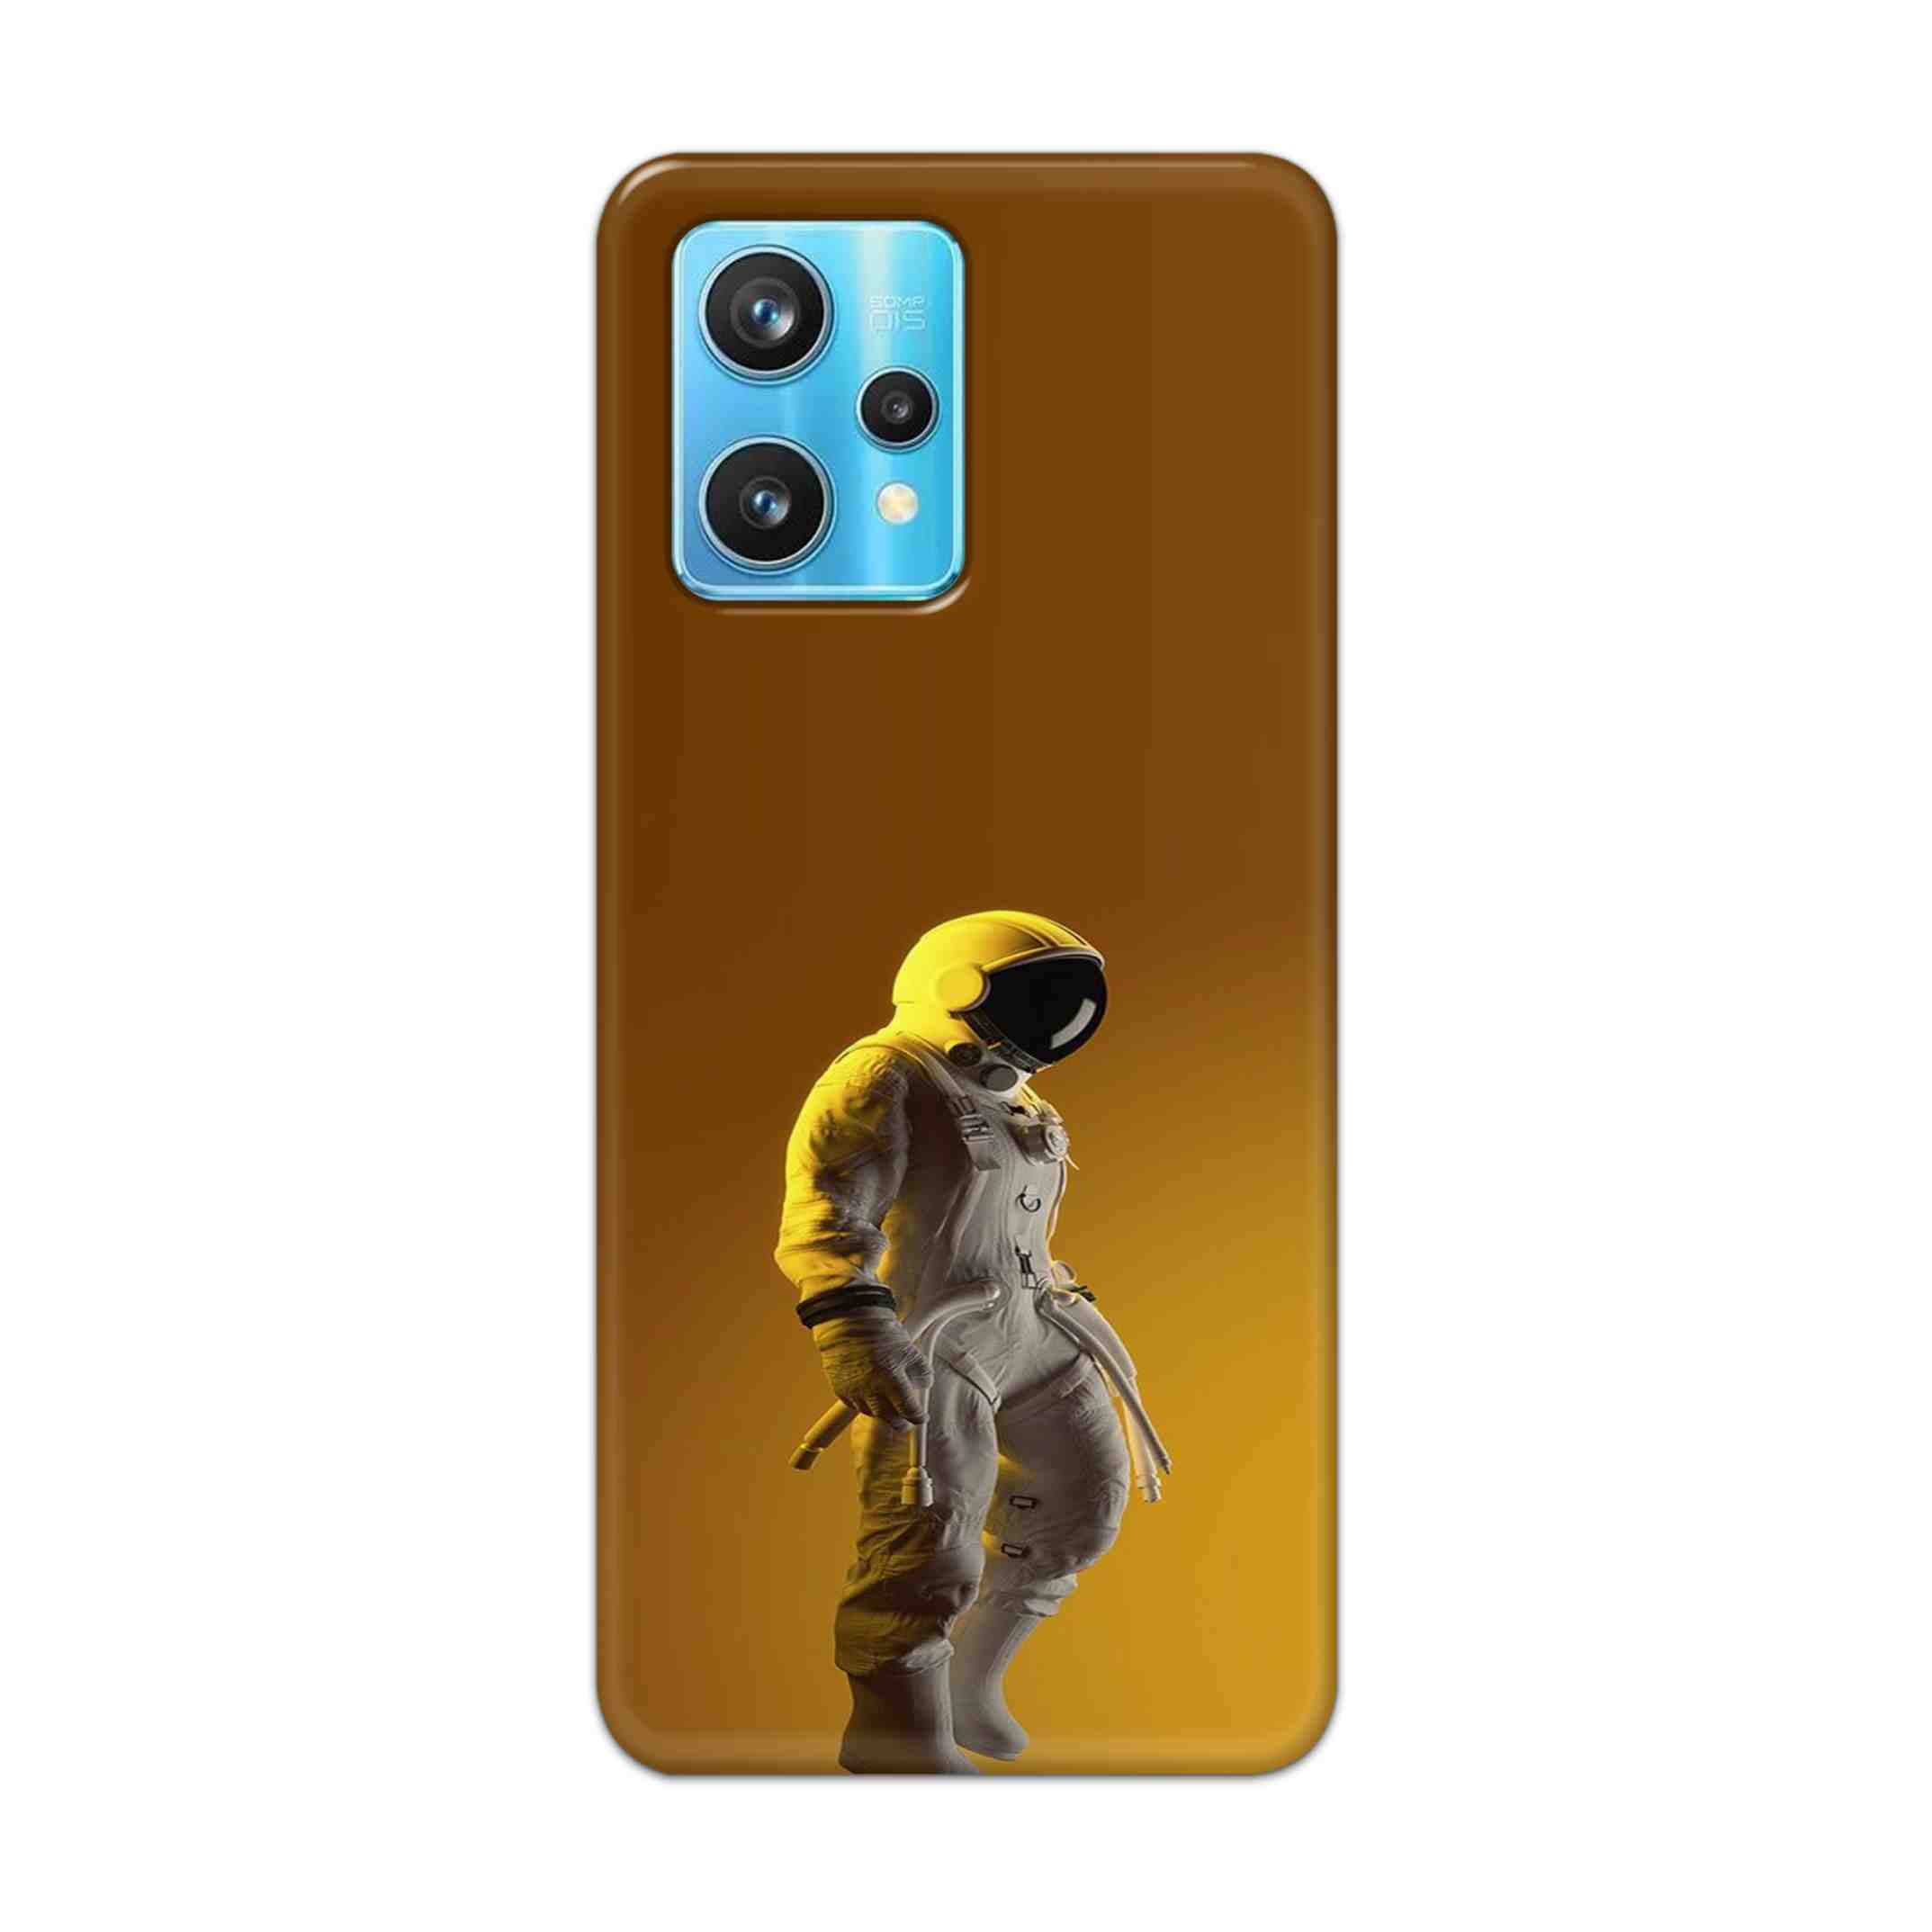 Buy Yellow Astronaut Hard Back Mobile Phone Case Cover For Realme 9 Pro Plus Online